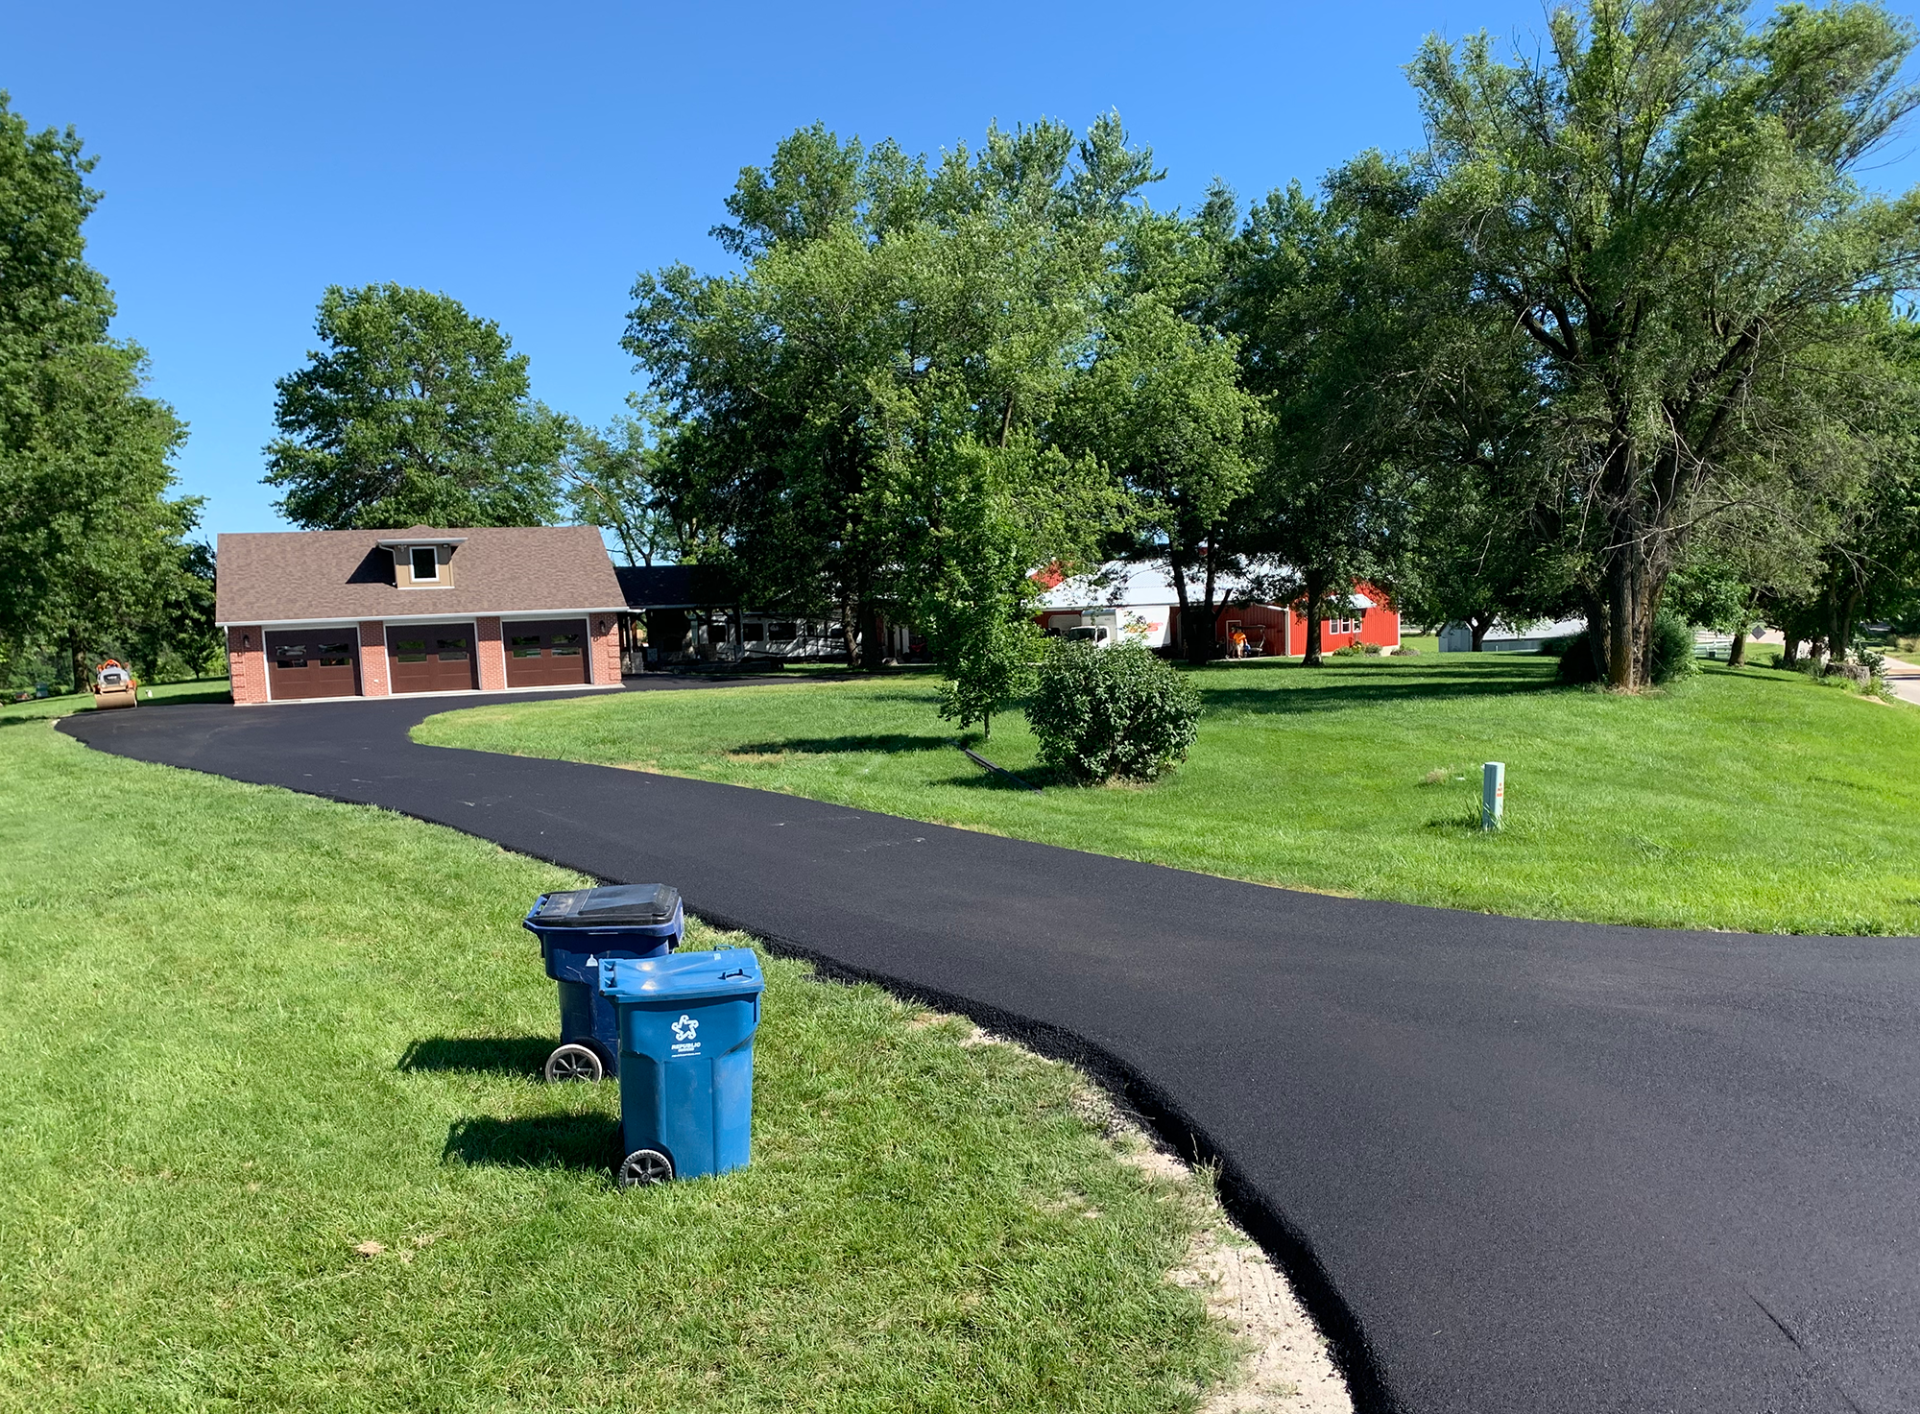 Get the Top-Notch Residential Asphalt Service You Deserve From MoSEAL in Moberly, MO.